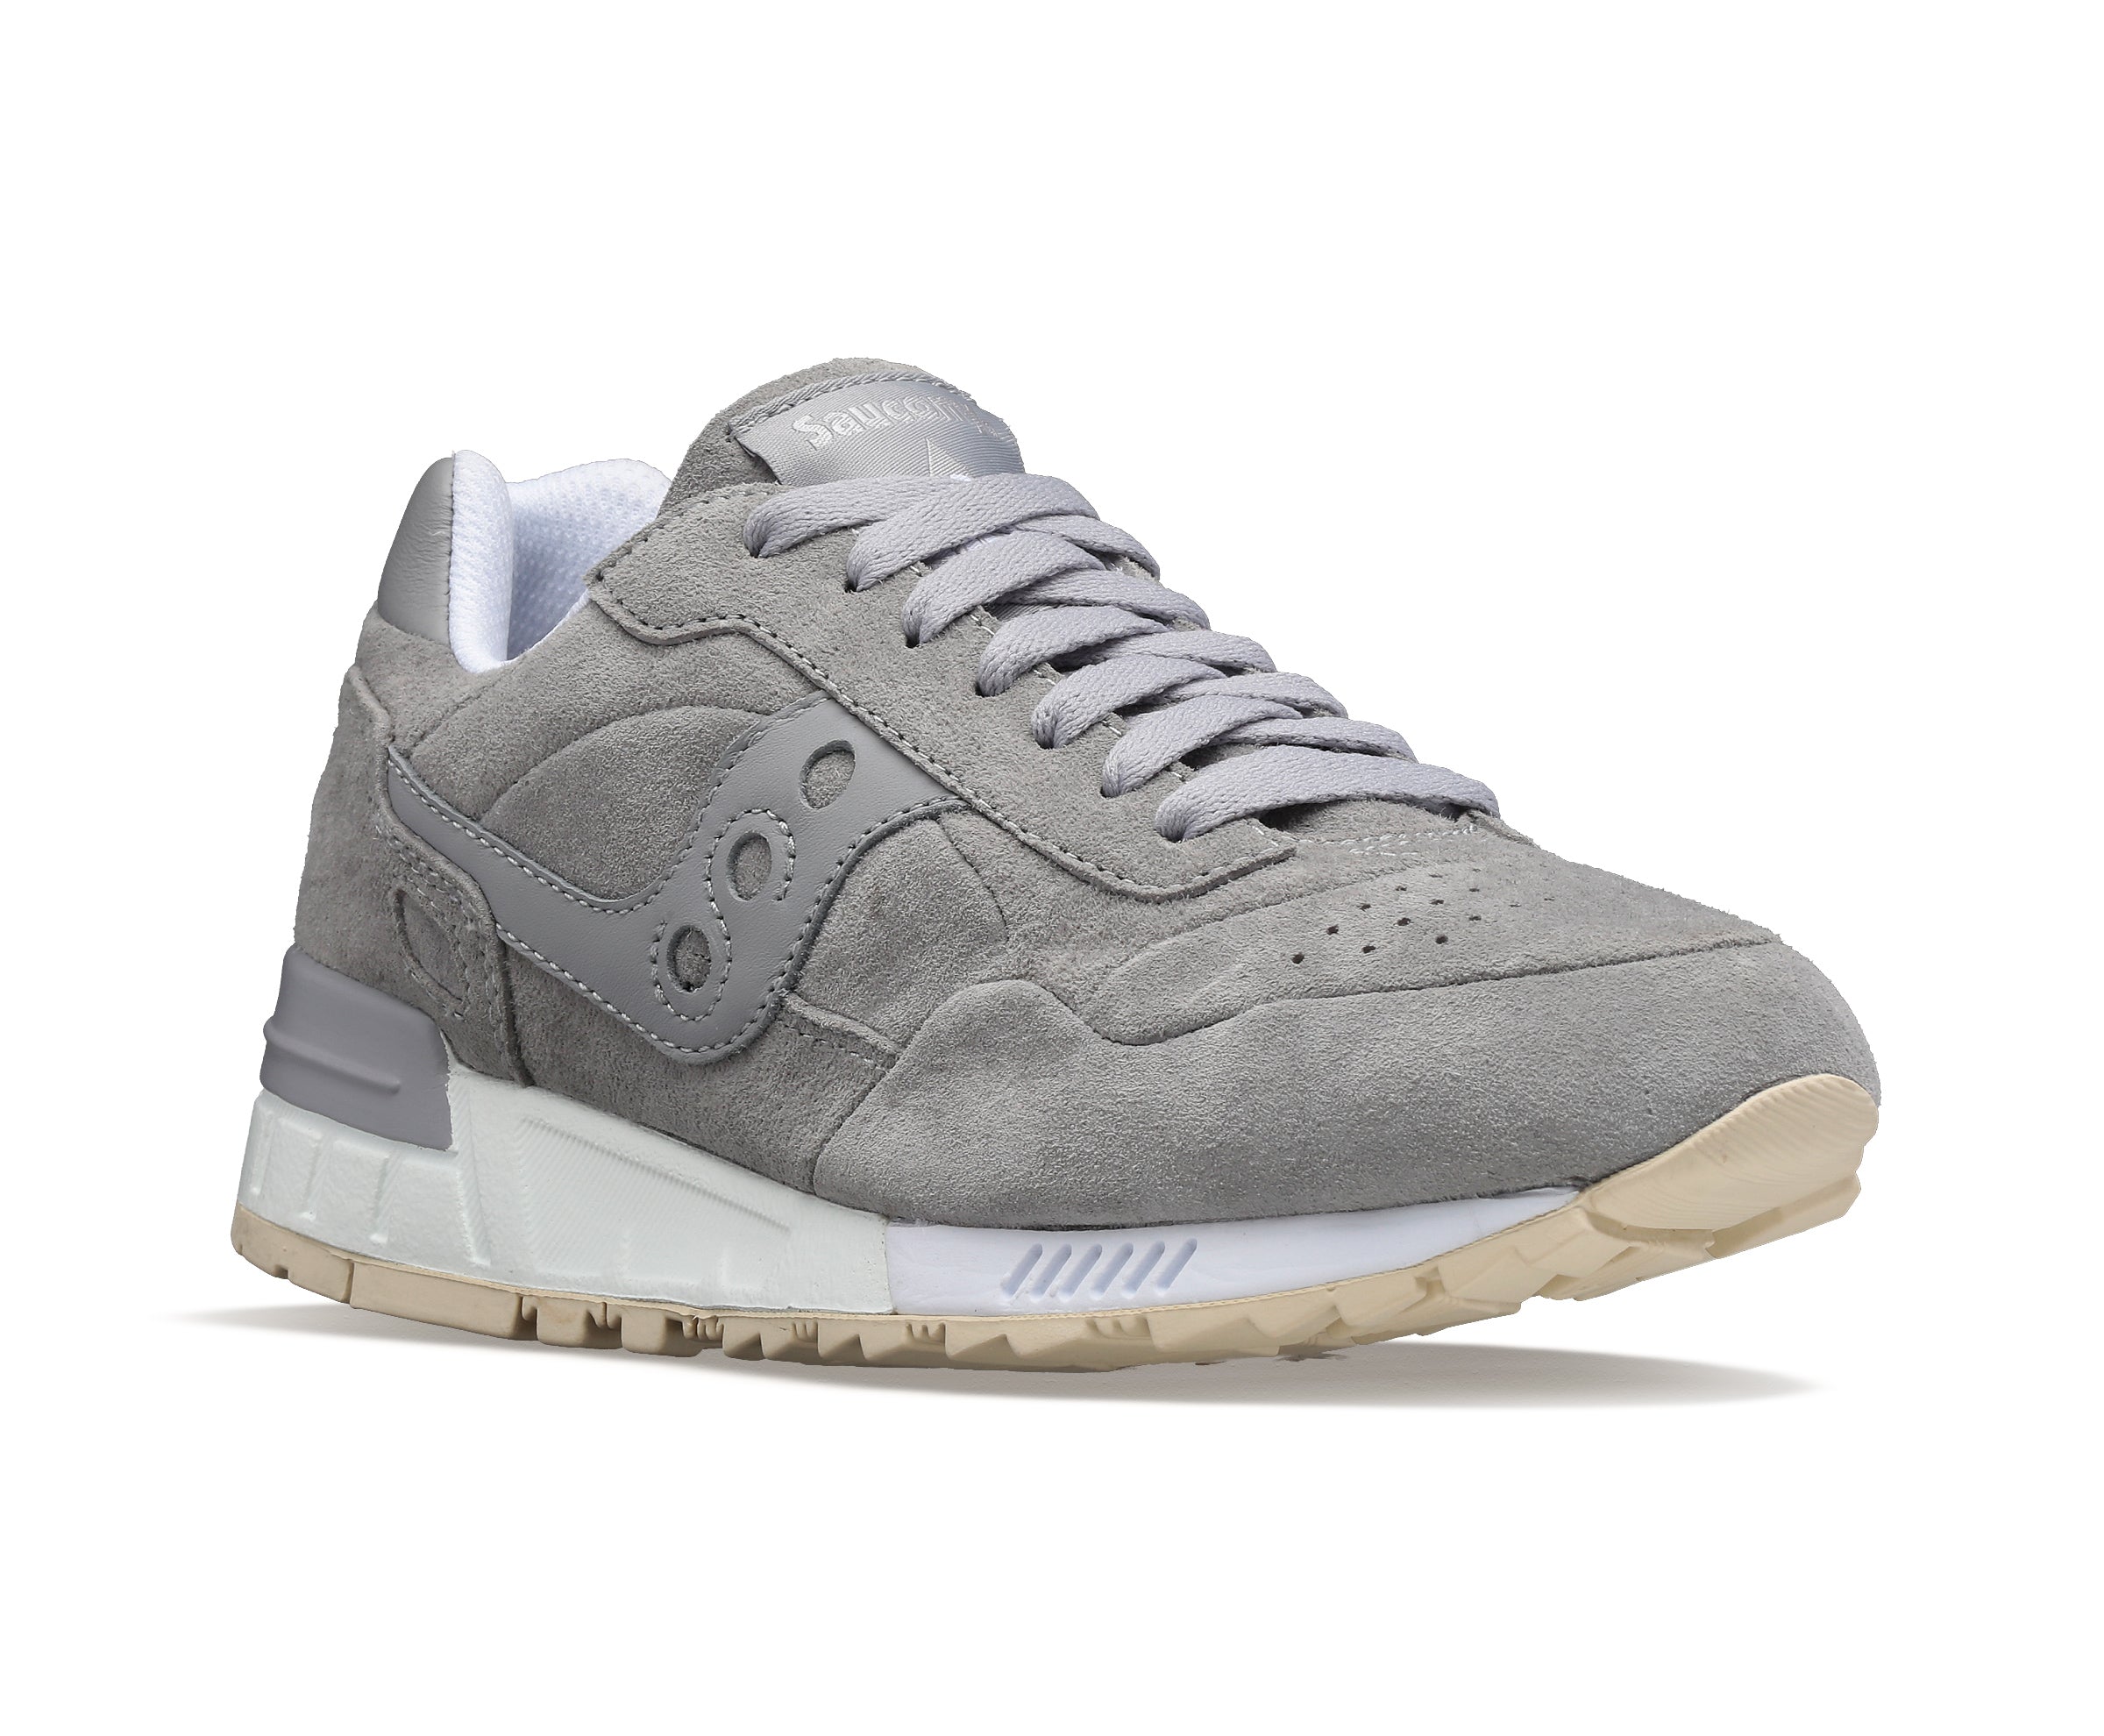 Front angle view of the Saucony 5000 Unisex lifestyle shoe in Grey